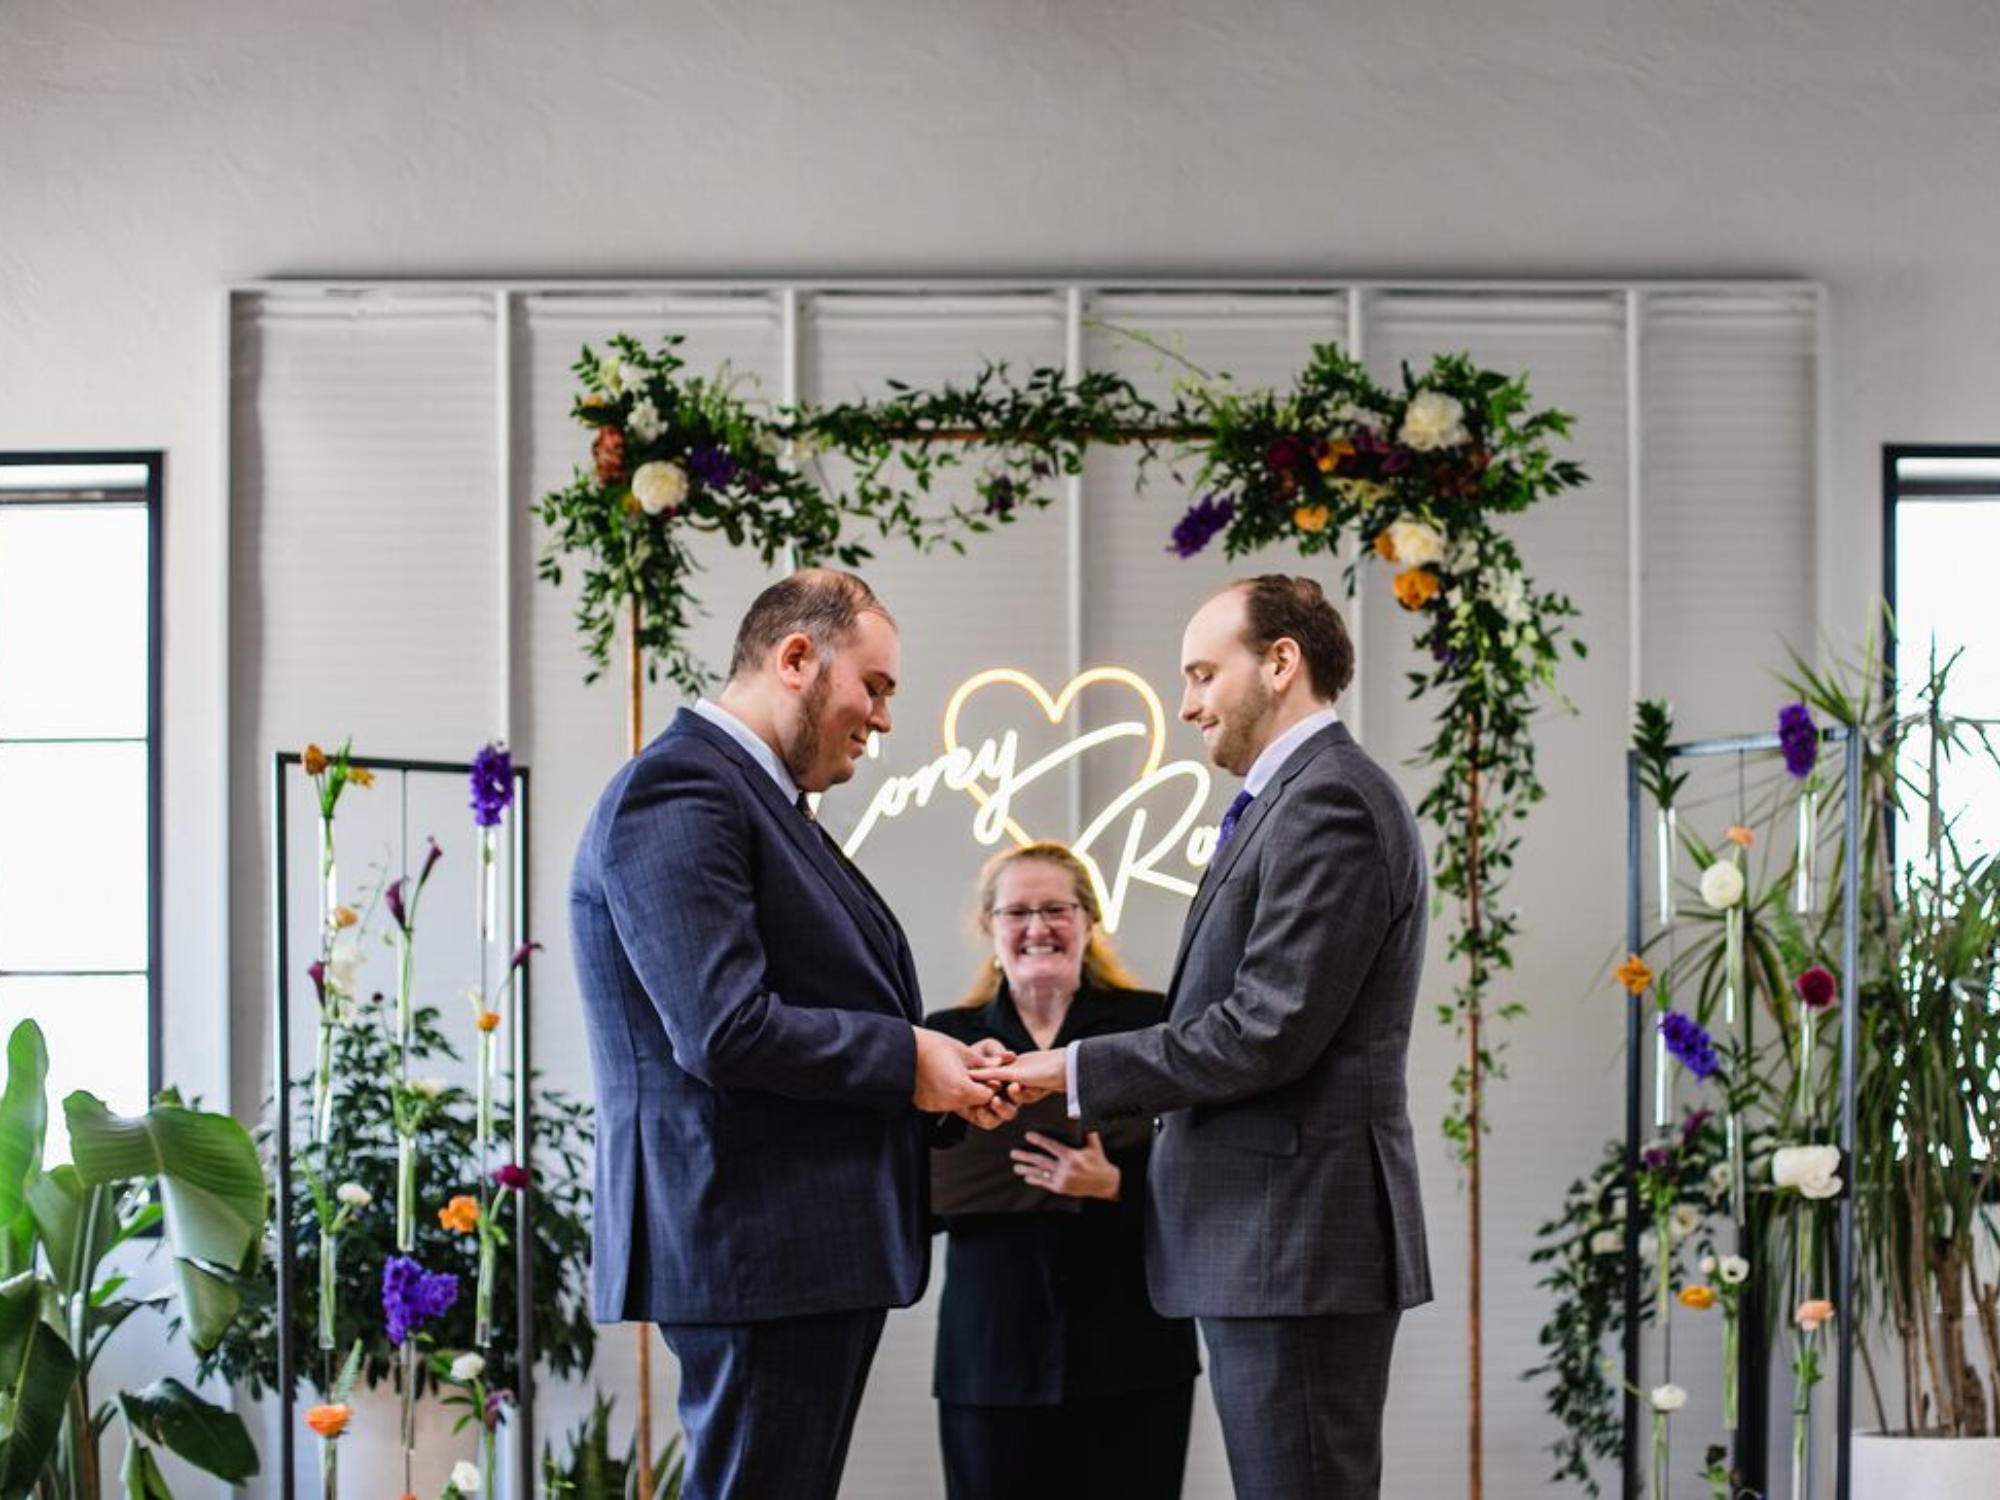 Couple getting married at ceremony with officiant